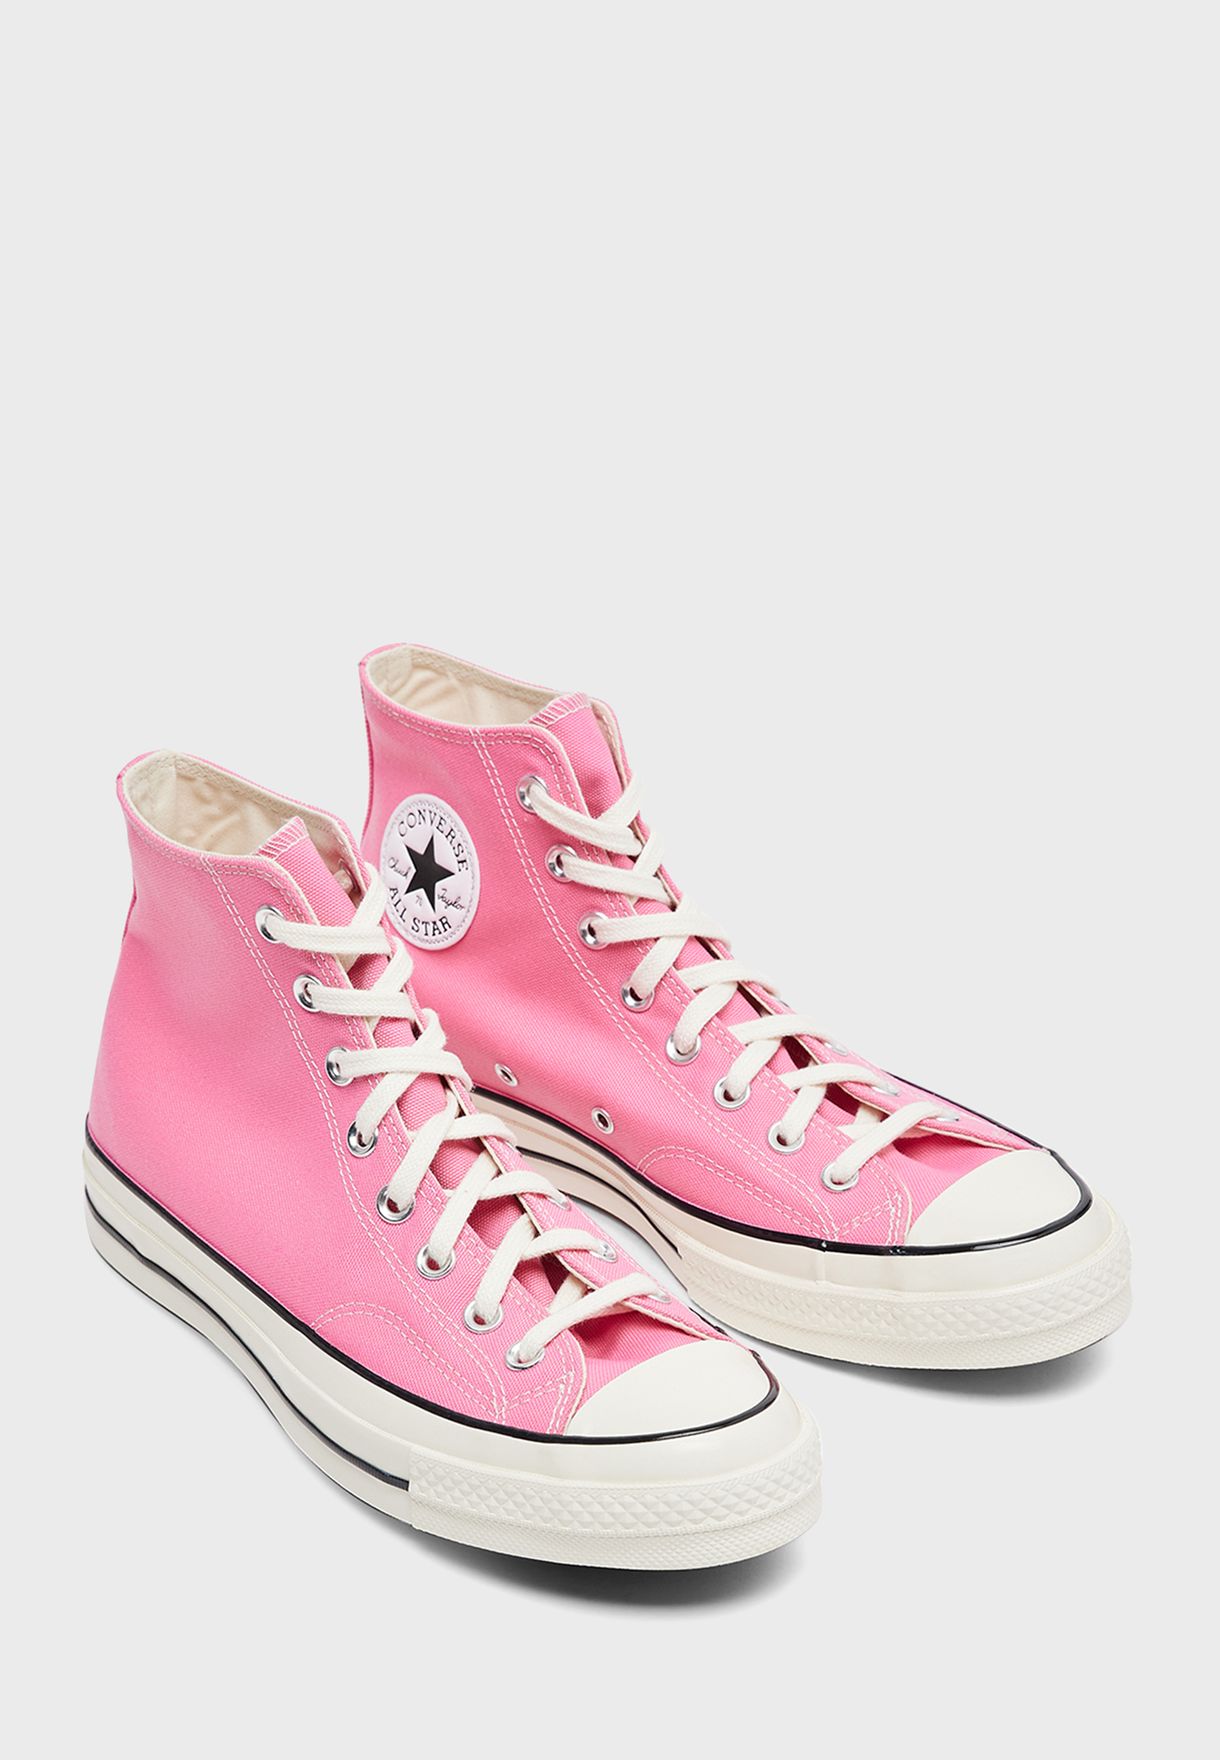 Unisex Chuck Taylor All Star 70 Sneakers